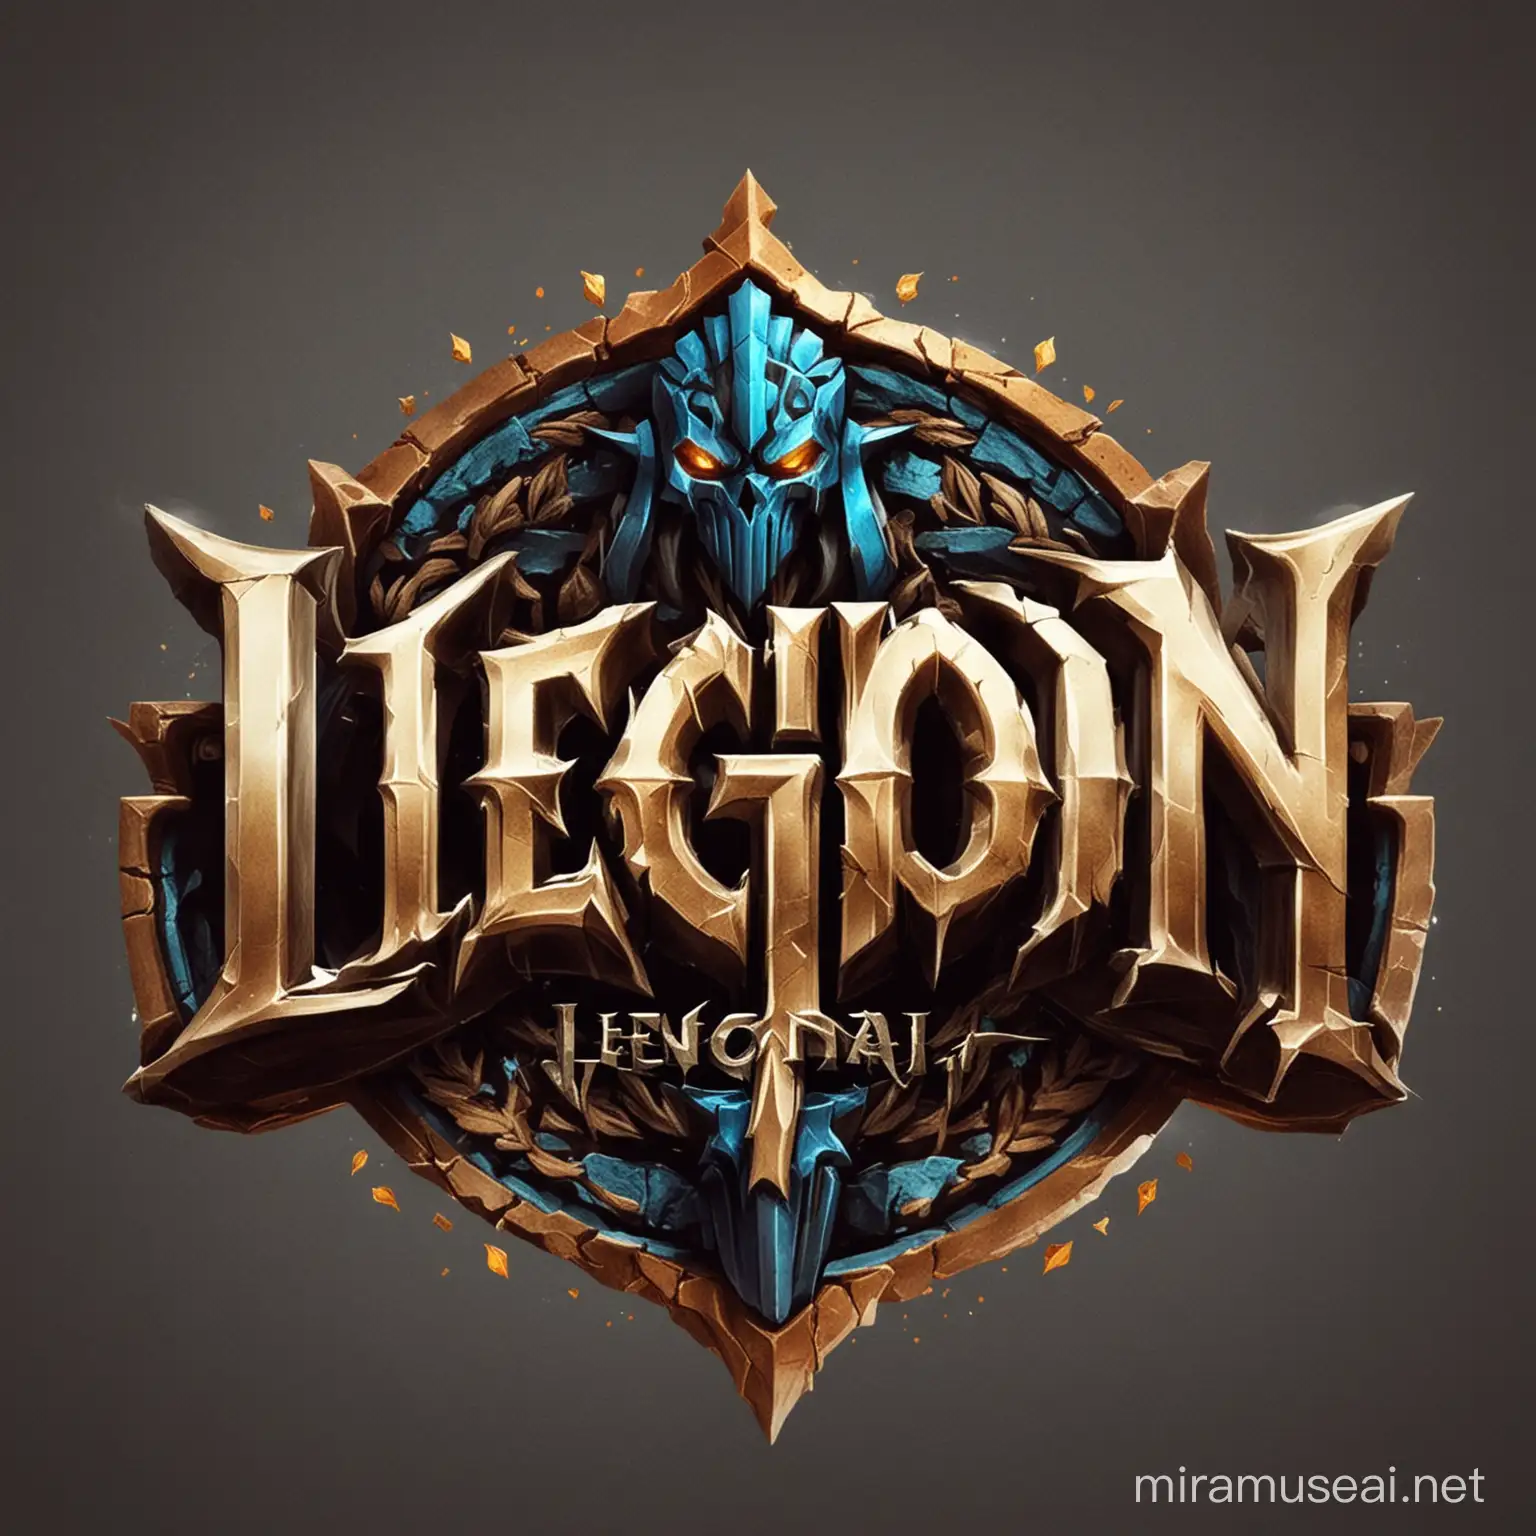 "Design a captivating logo for our MMORPG server 'Legion', embodying strength, unity, and abundance. Drawing from words like multitude, army, and cohort, craft a striking design that reflects the power and unity of our community. Please ensure the logo is transparent with no background and incorporate the following colors: #104b53, #d99b5e, #fad9b8."